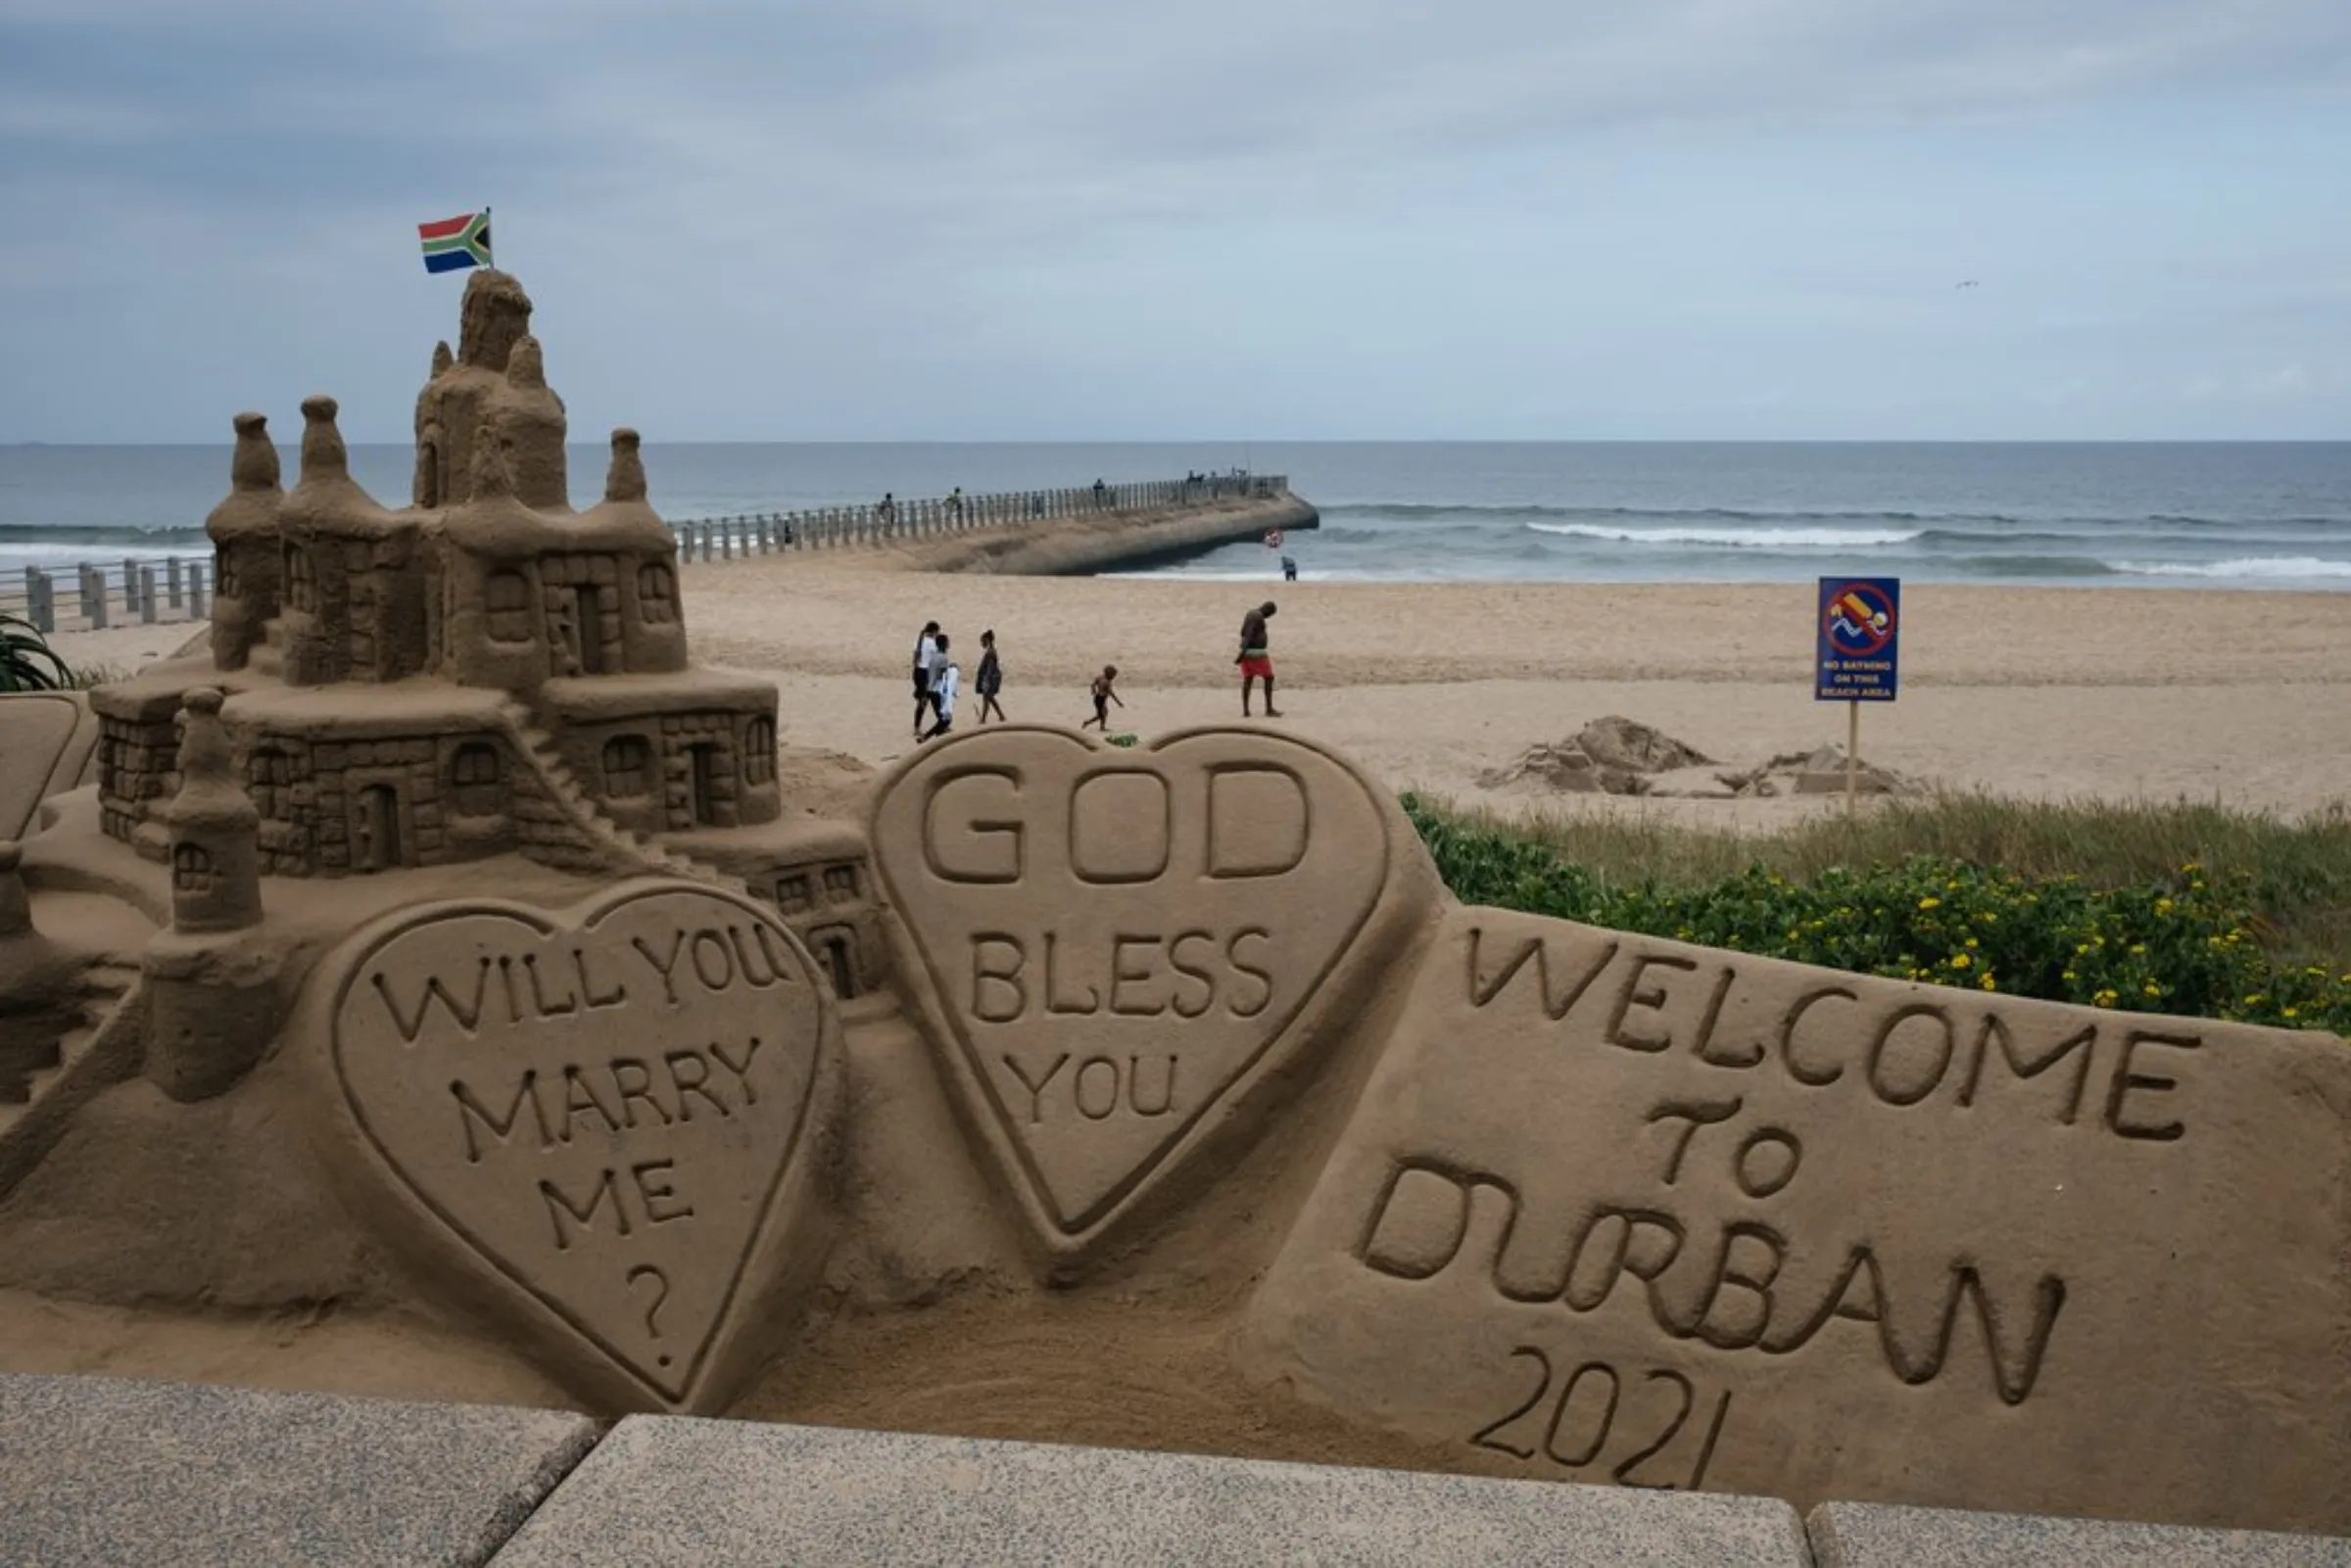 A sand sculpture stands along Durban's beachfront promenade, the city's main attraction for tourists and locals alike, April 1, 2021. Rising sea-levels as a result of climate change threaten the iconic stretch of beach